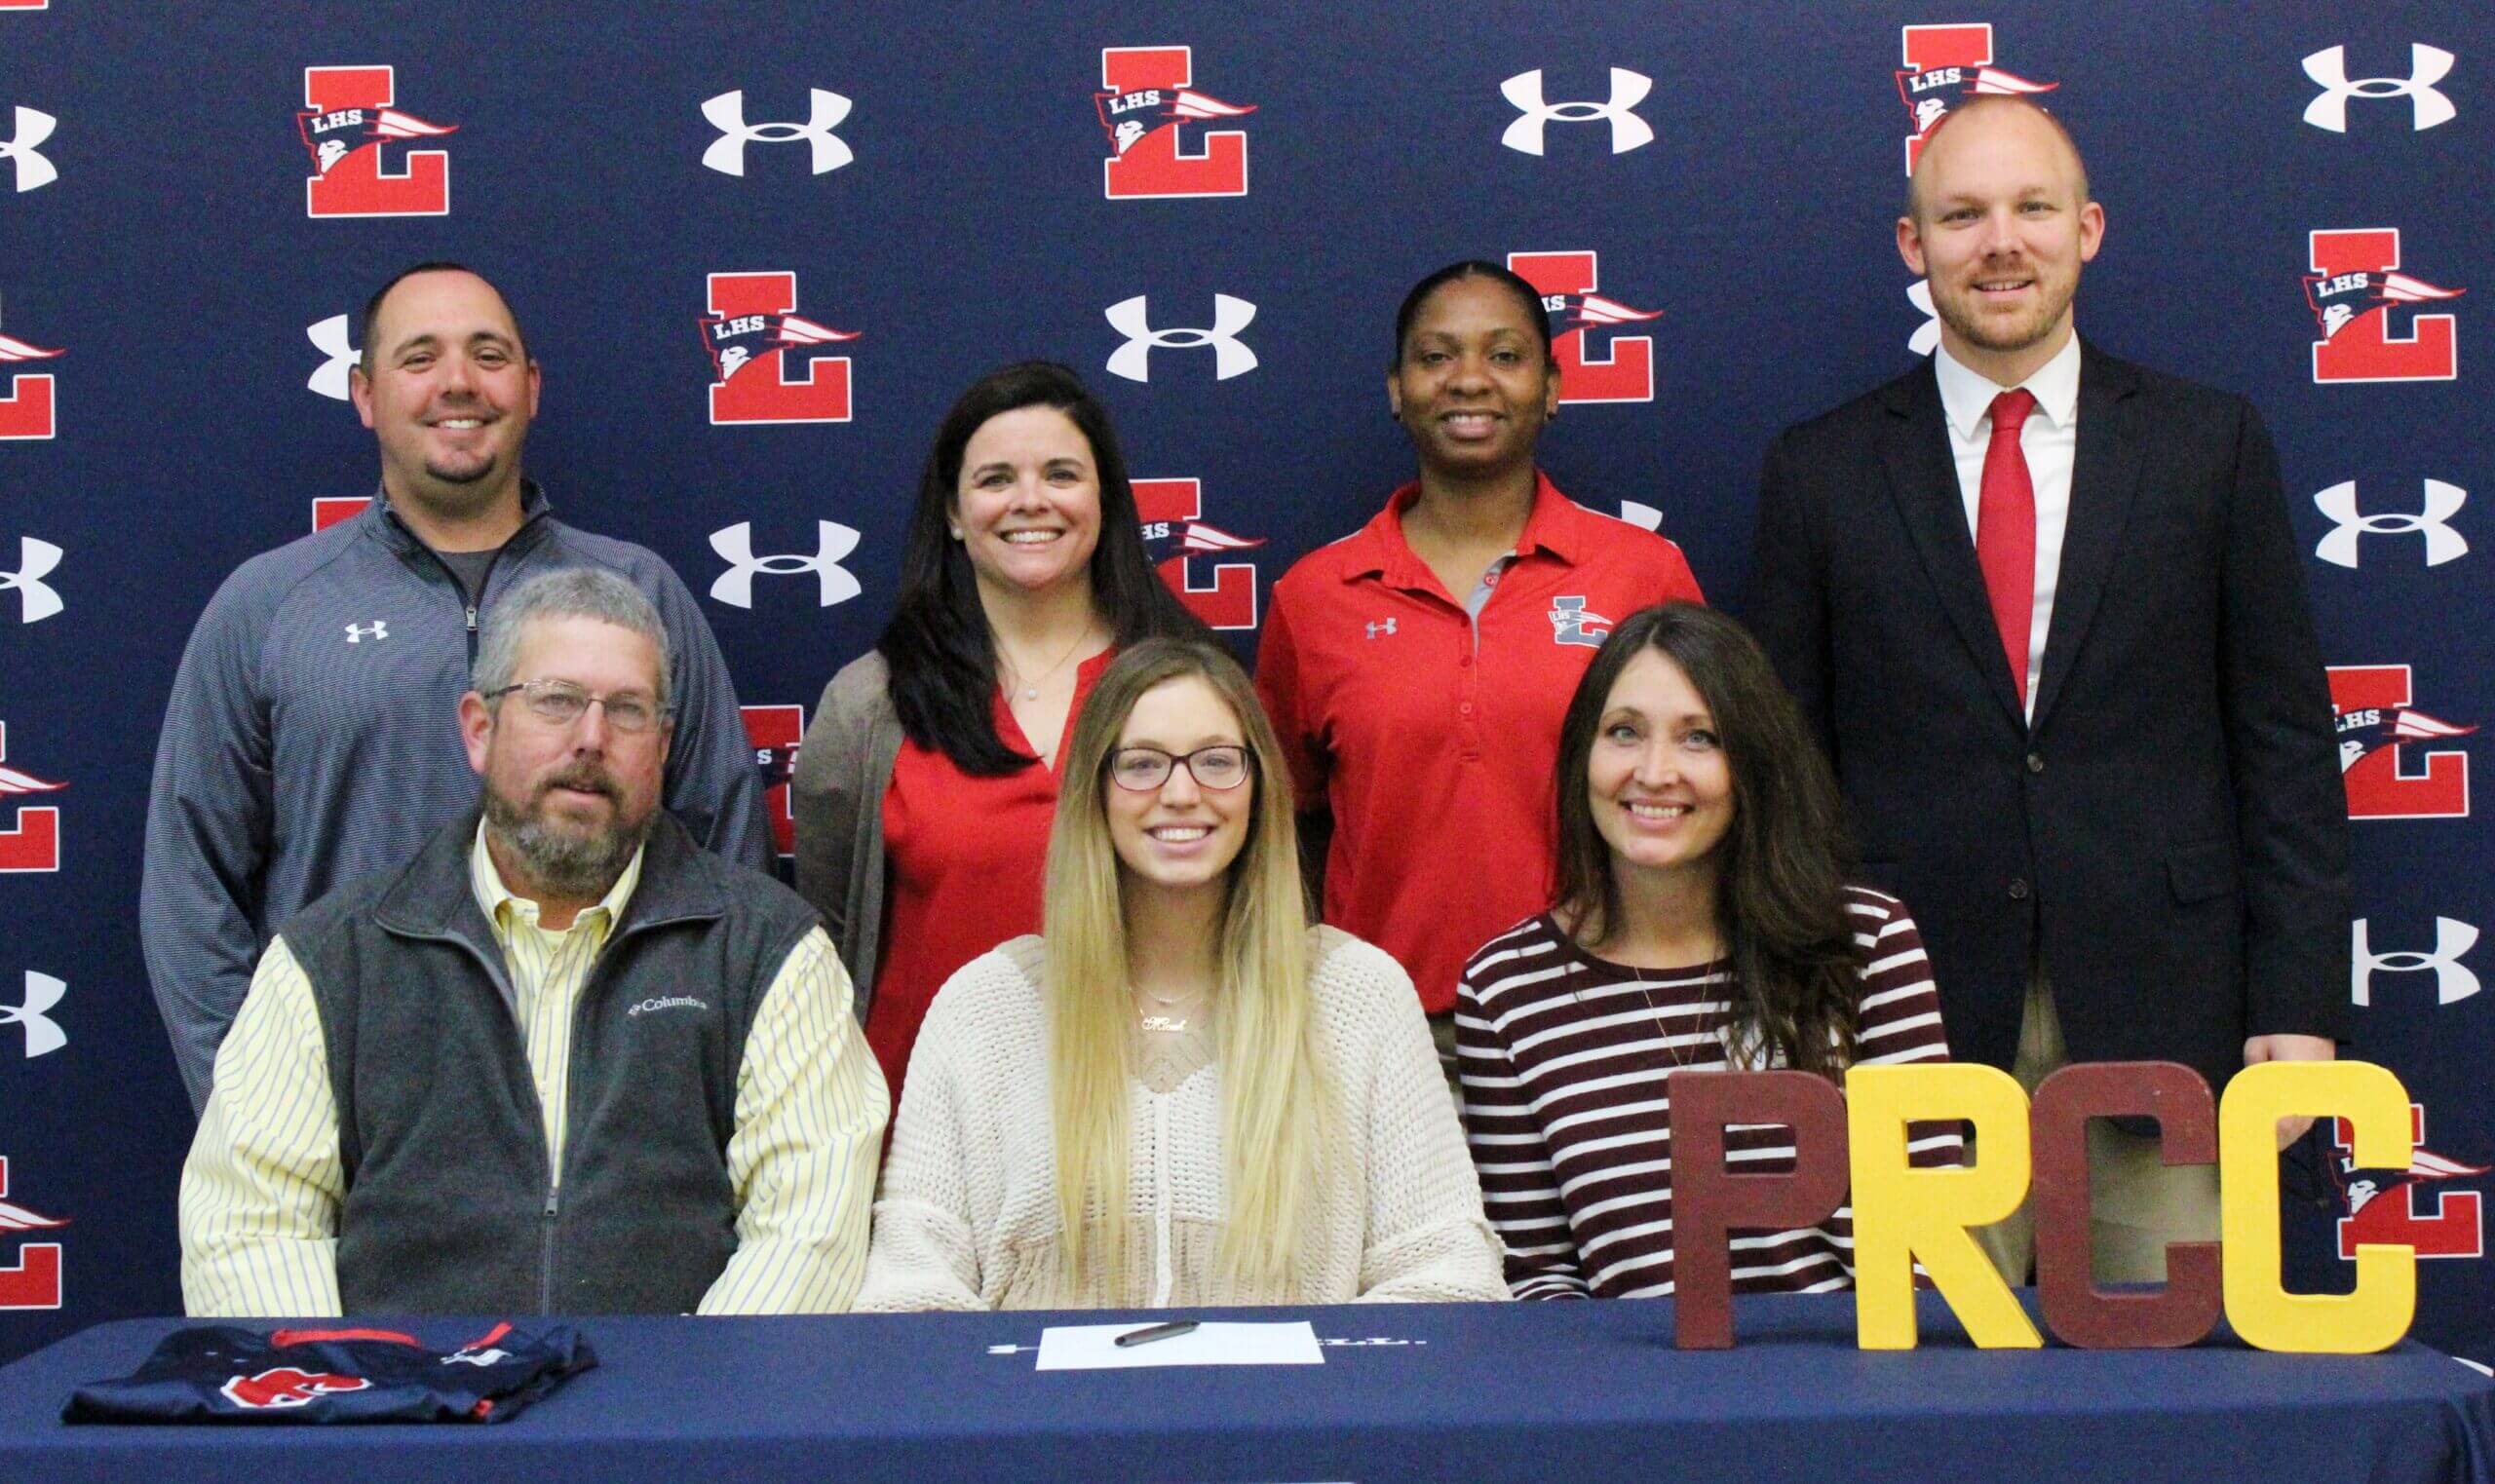 Lewisburg's Swift signs for Pearl River volleyball